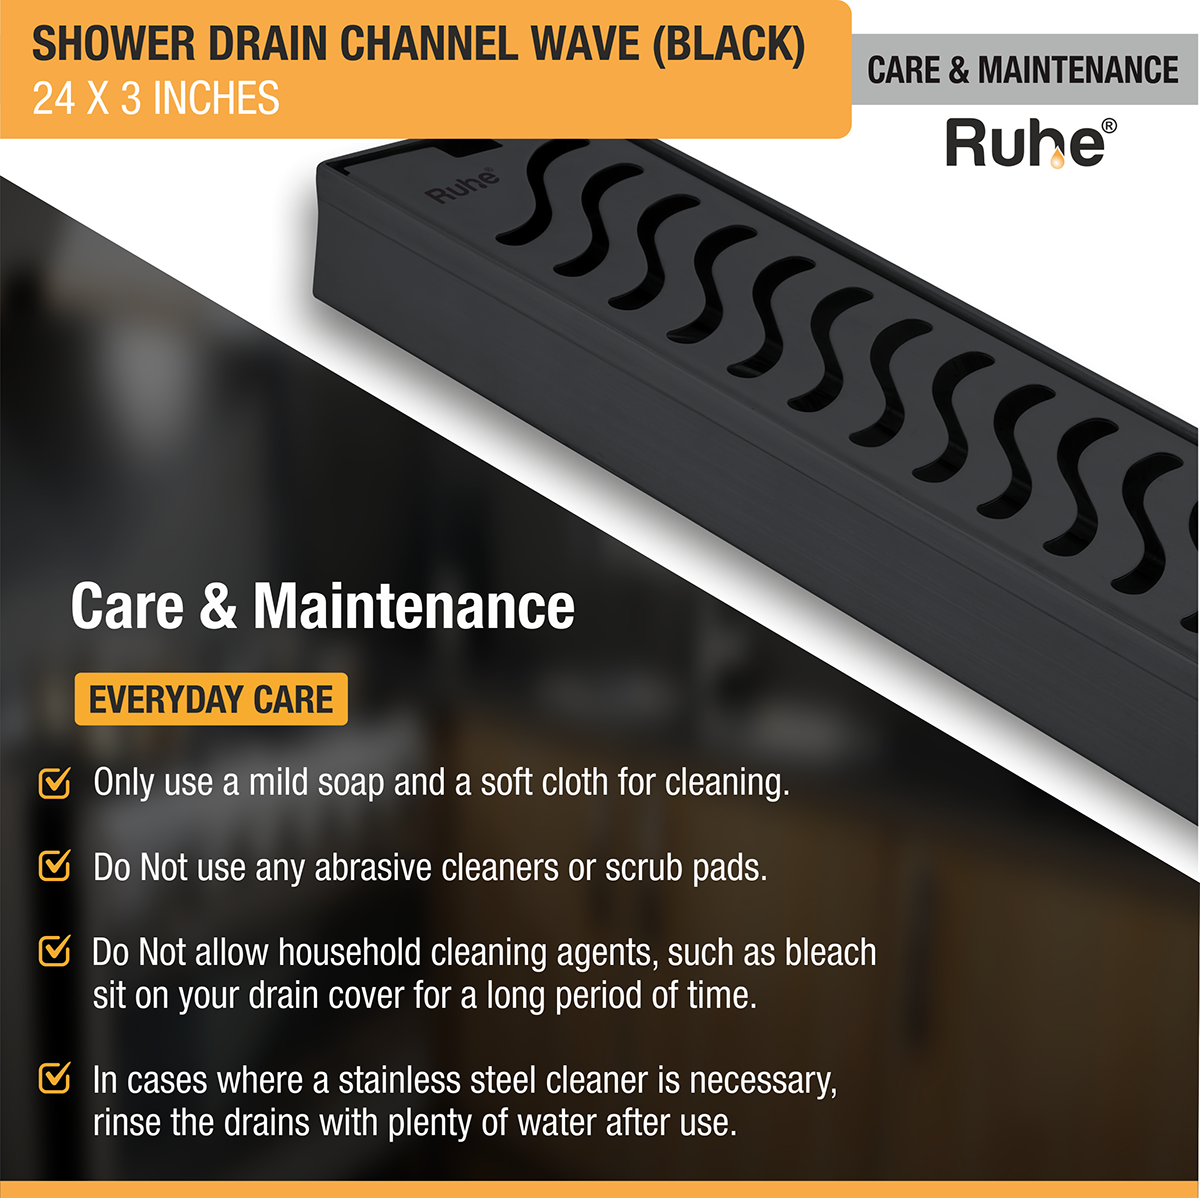 Wave Shower Drain Channel (24 x 3 Inches) Black PVD Coated care and maintenance